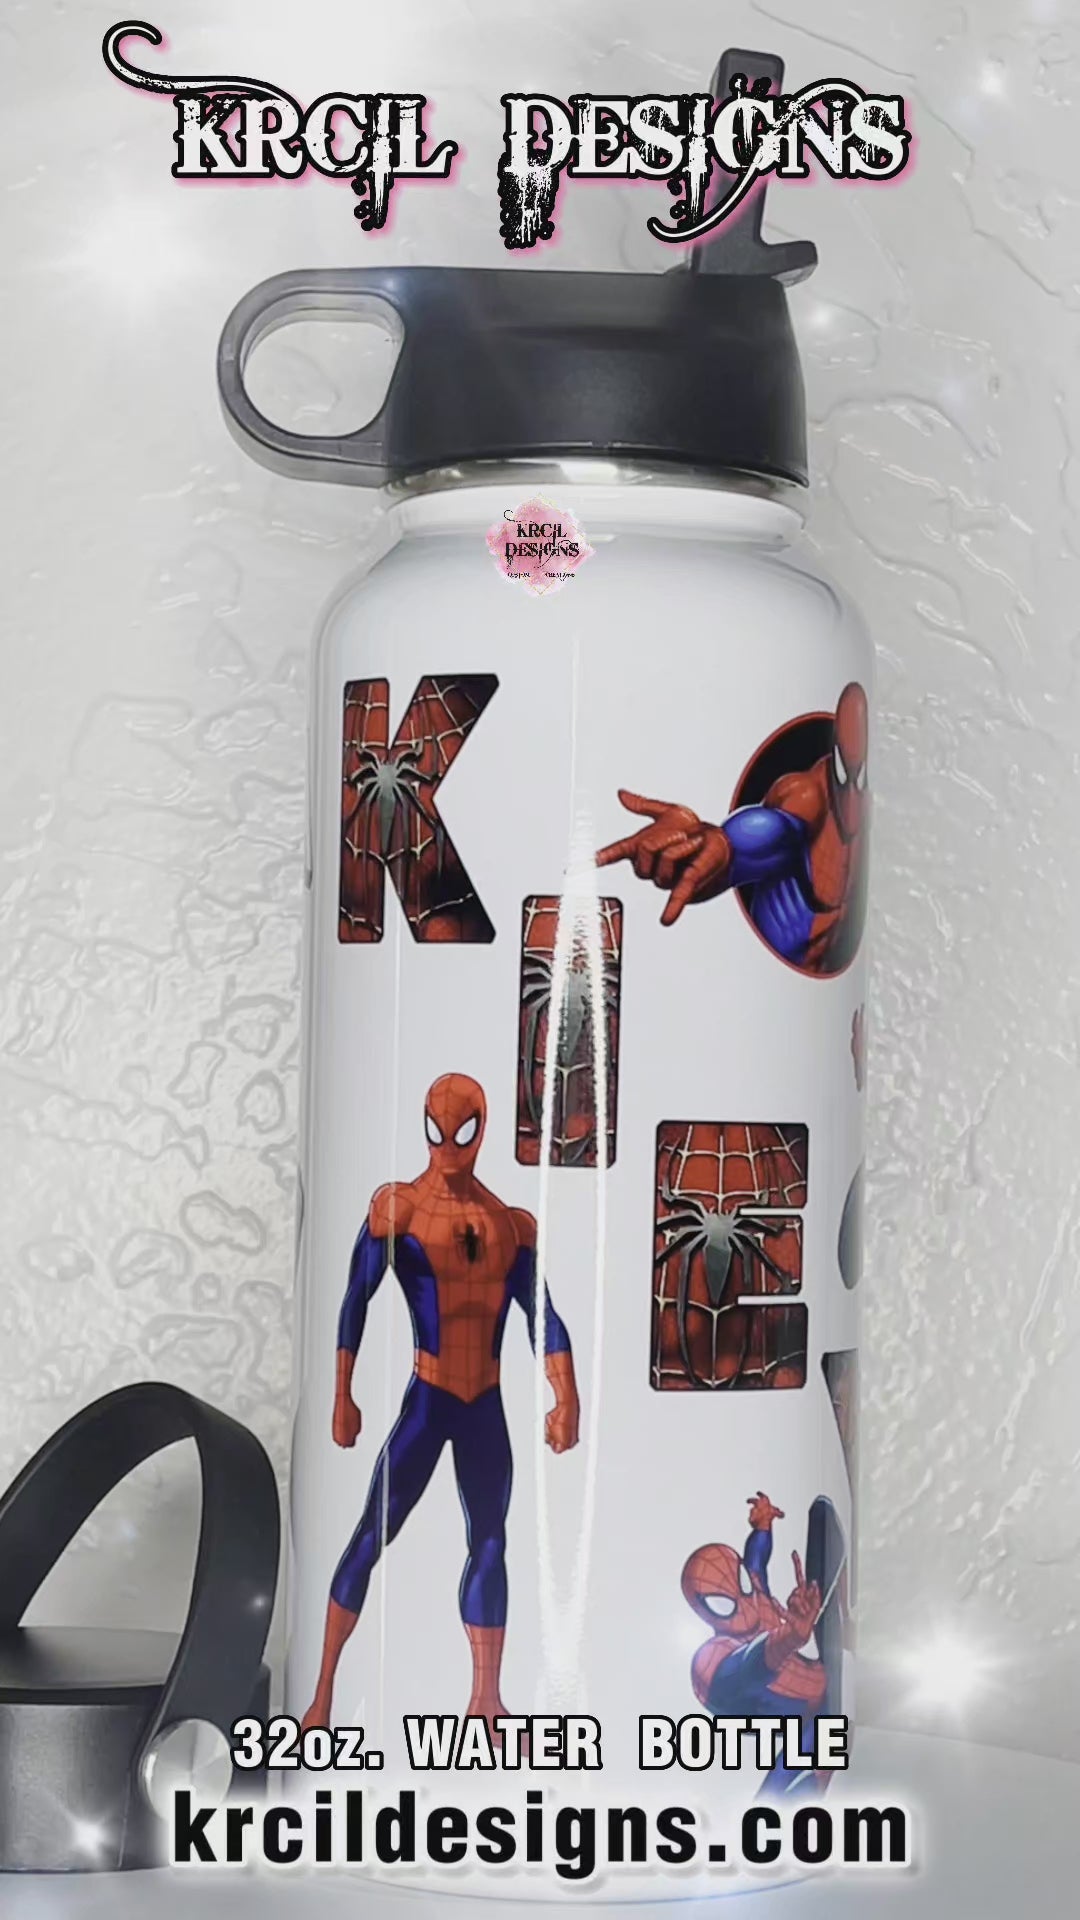 Spider-Man Personalized Hydro Water Bottle with Name, Krcil Designs –  Krcil Designs, Personalized Gifts